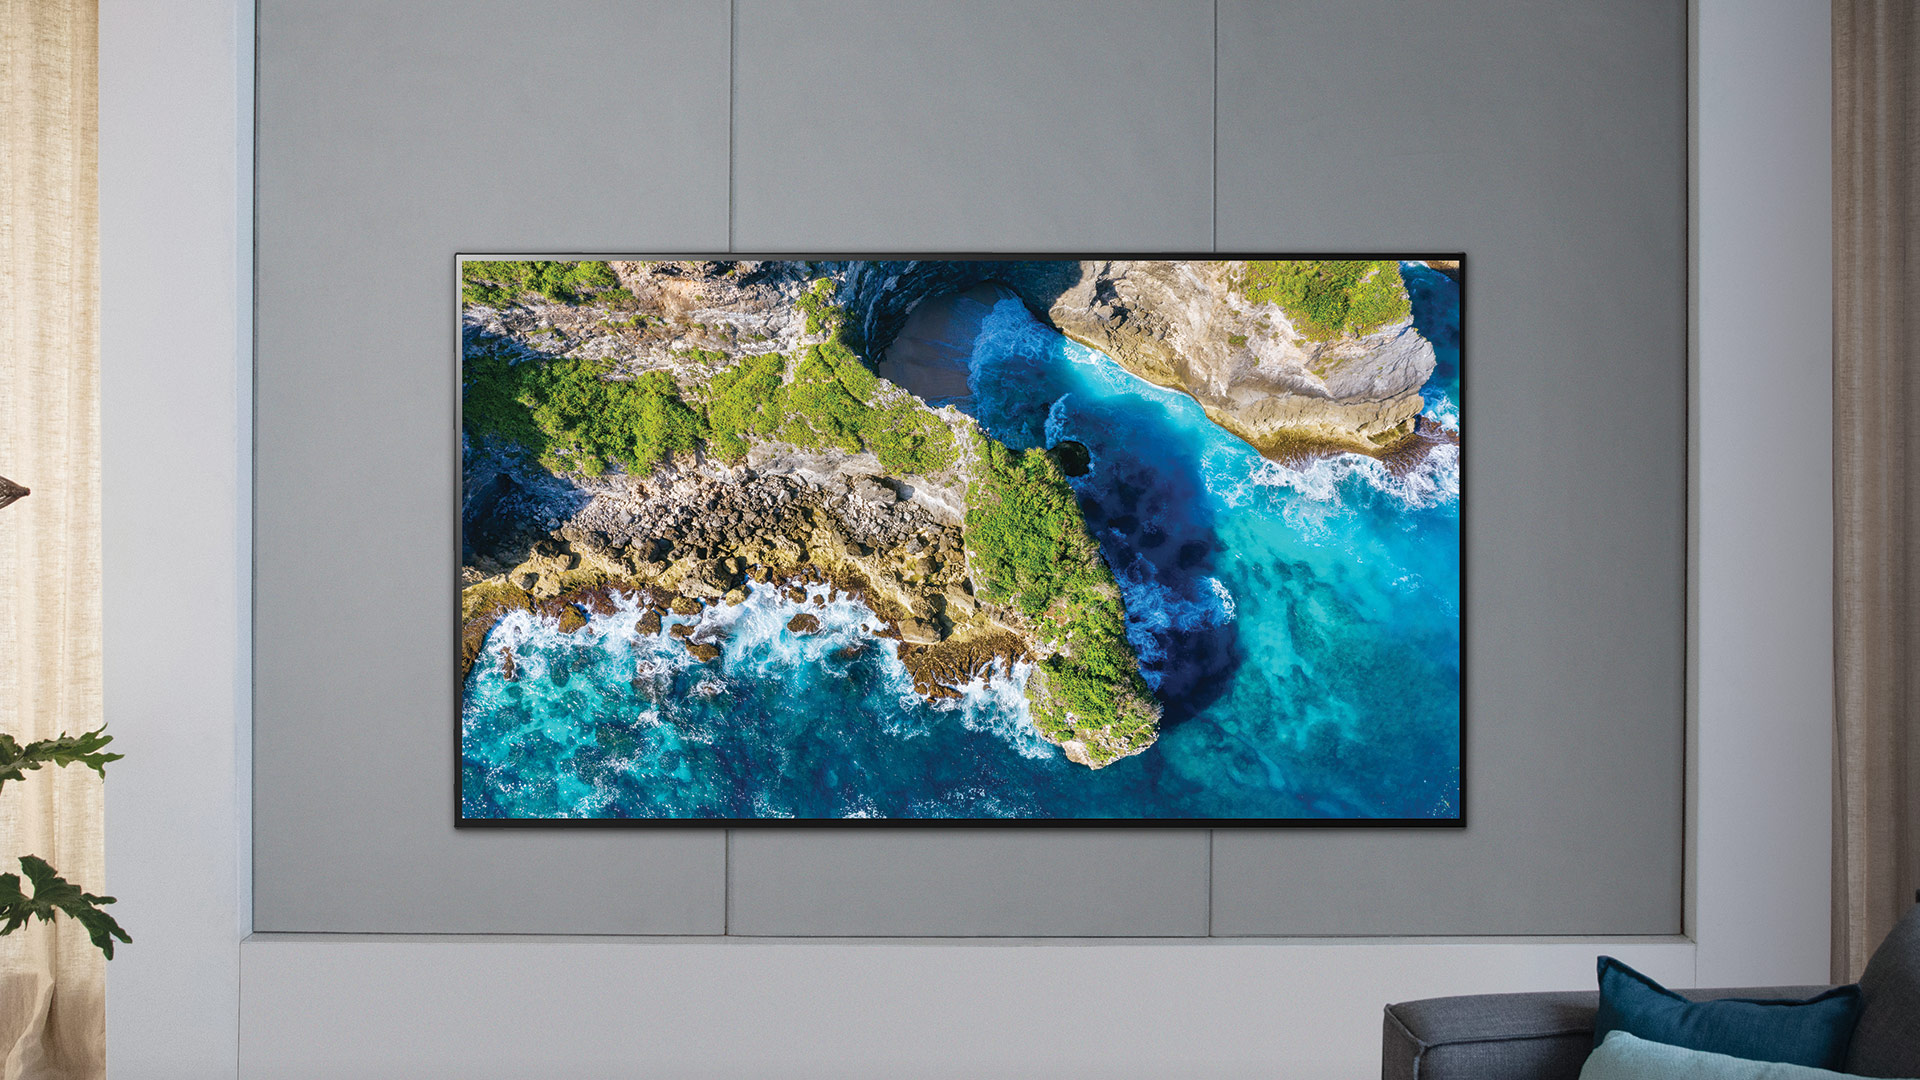 LG OLED hanging on wall